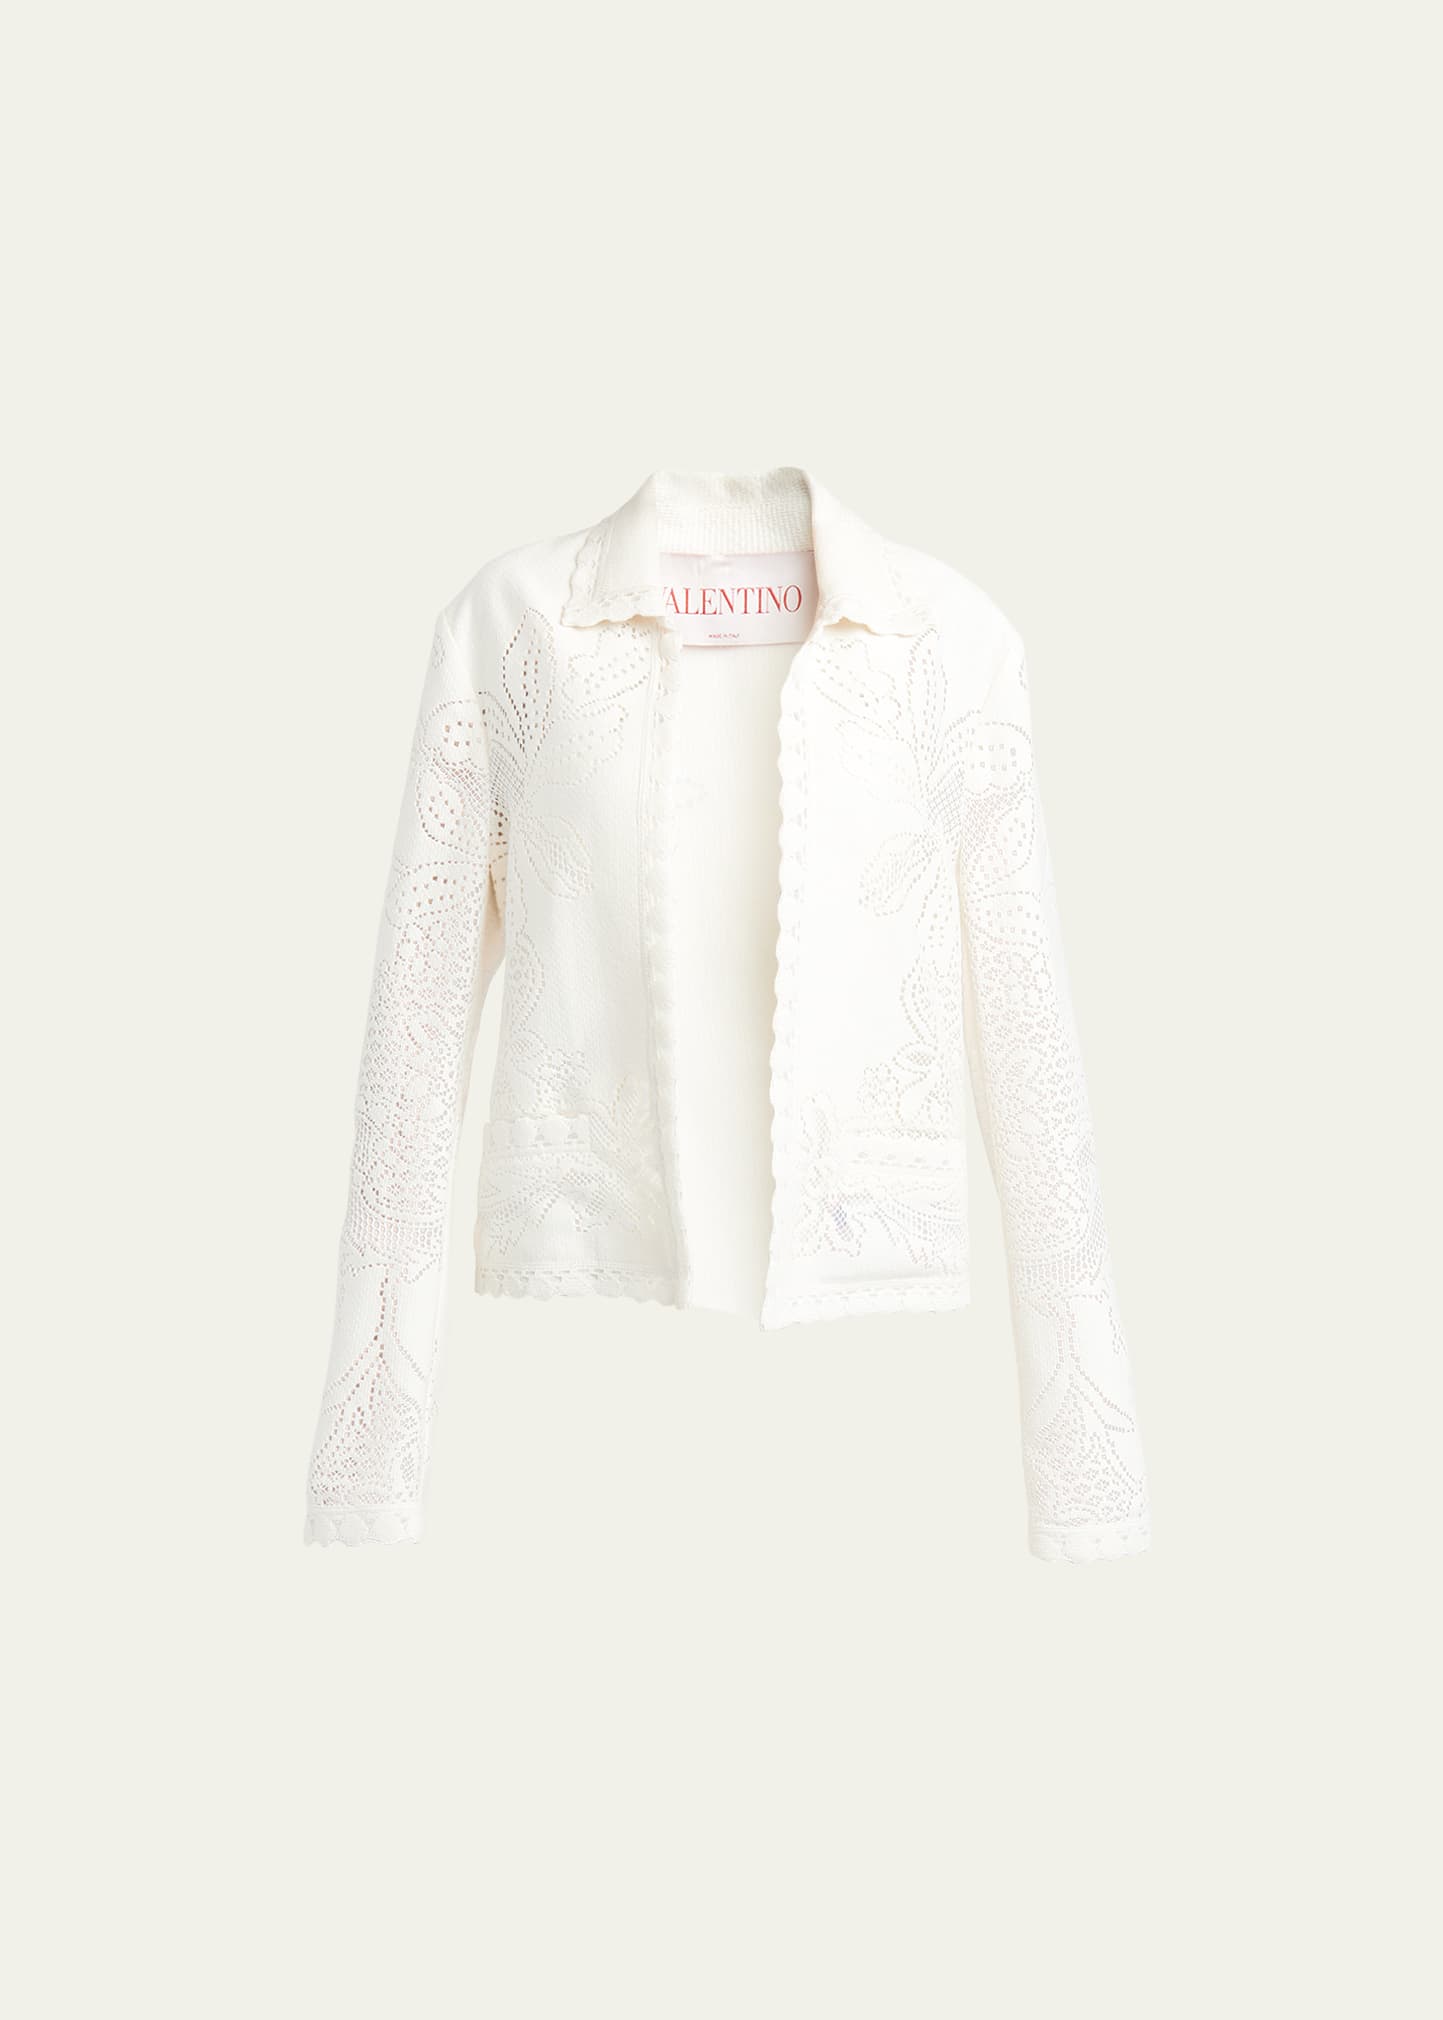 VALENTINO GUIPURE LACE COLLARED JACKET